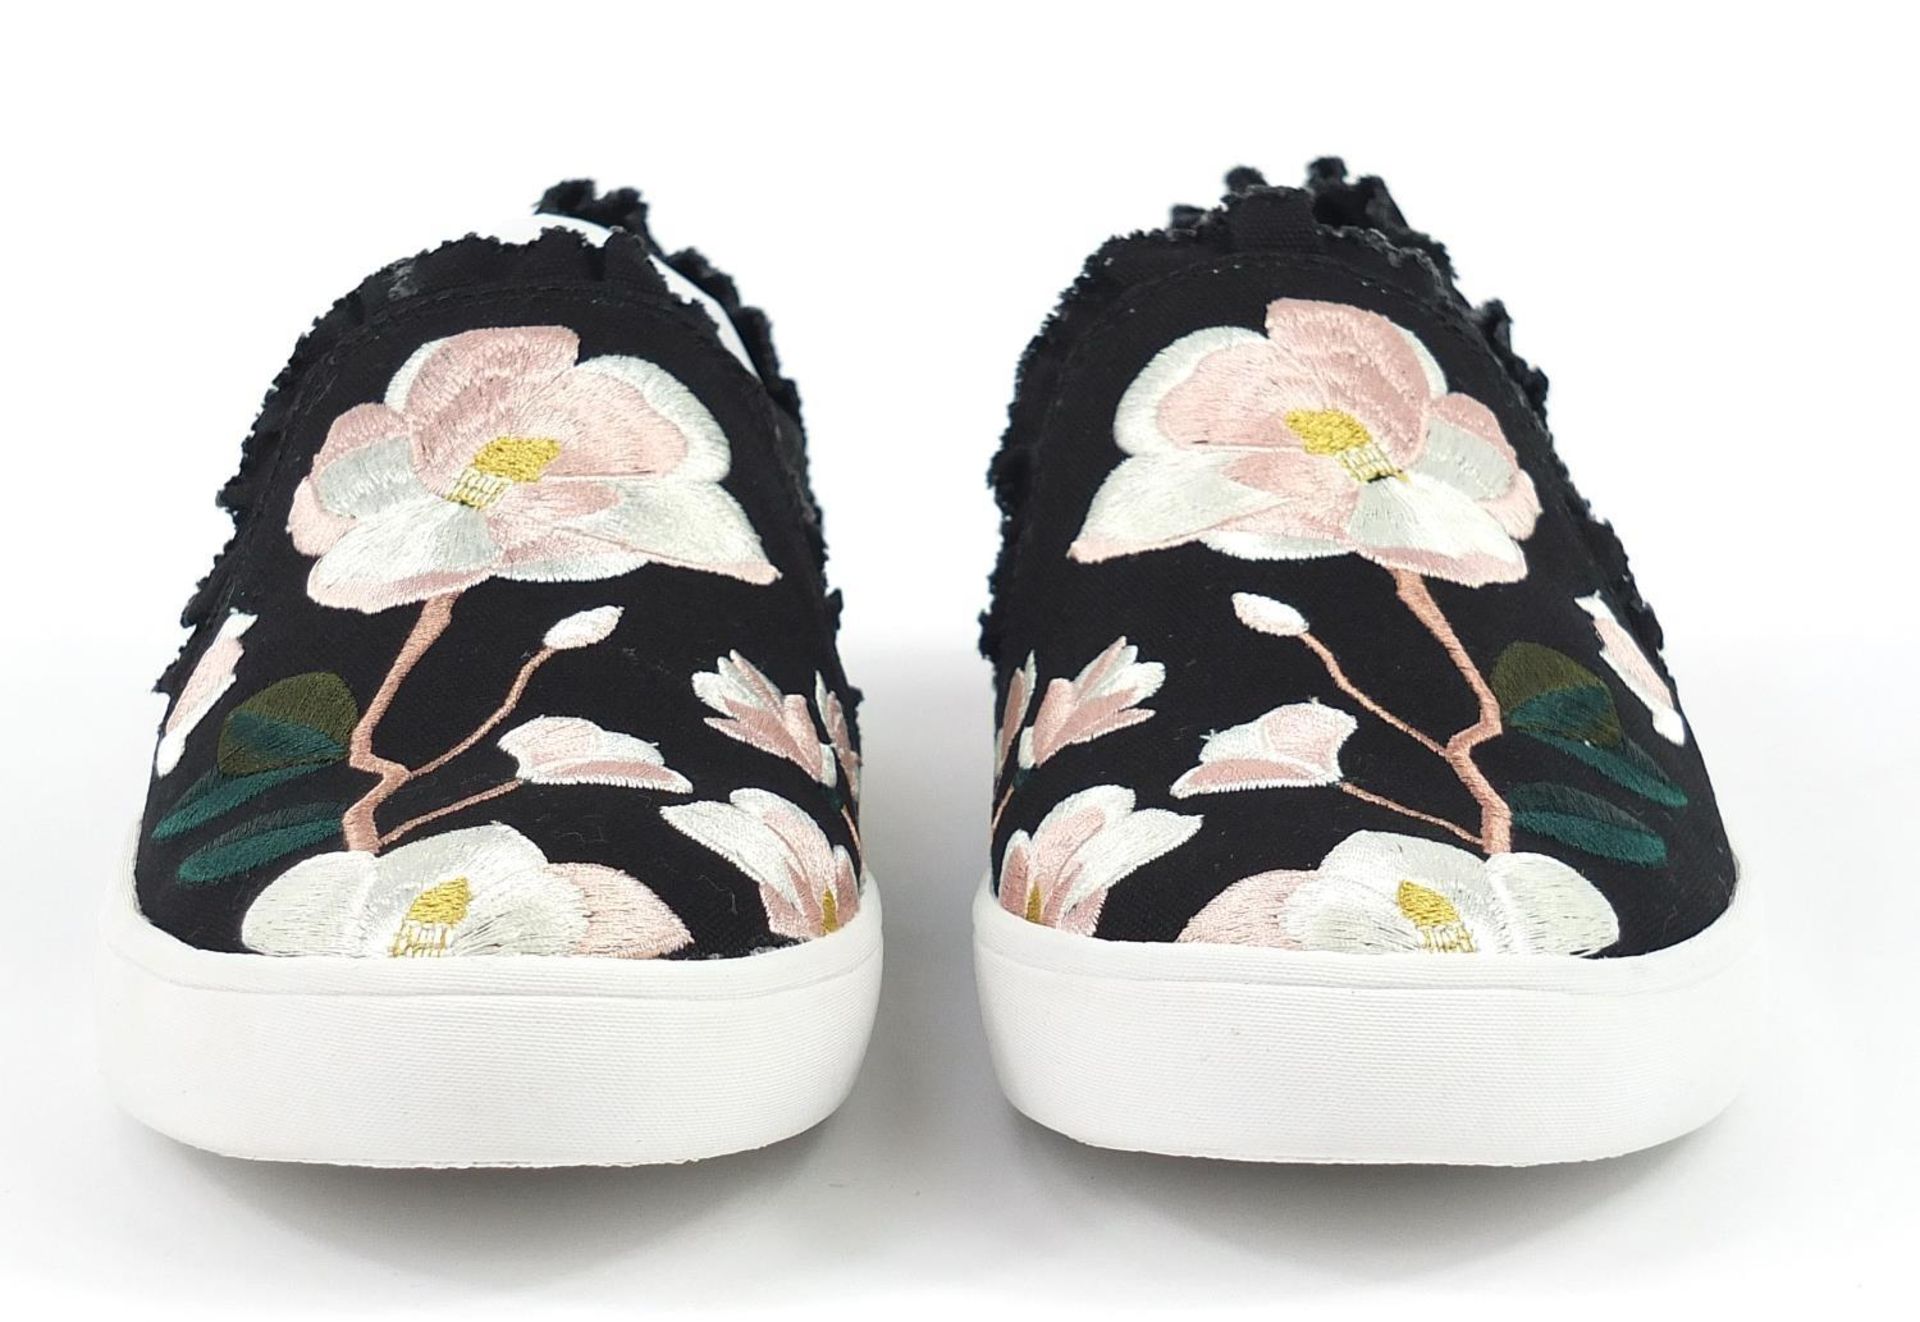 Kate Spade New York, pair of ladies' floral embroidered pumps - Image 3 of 7